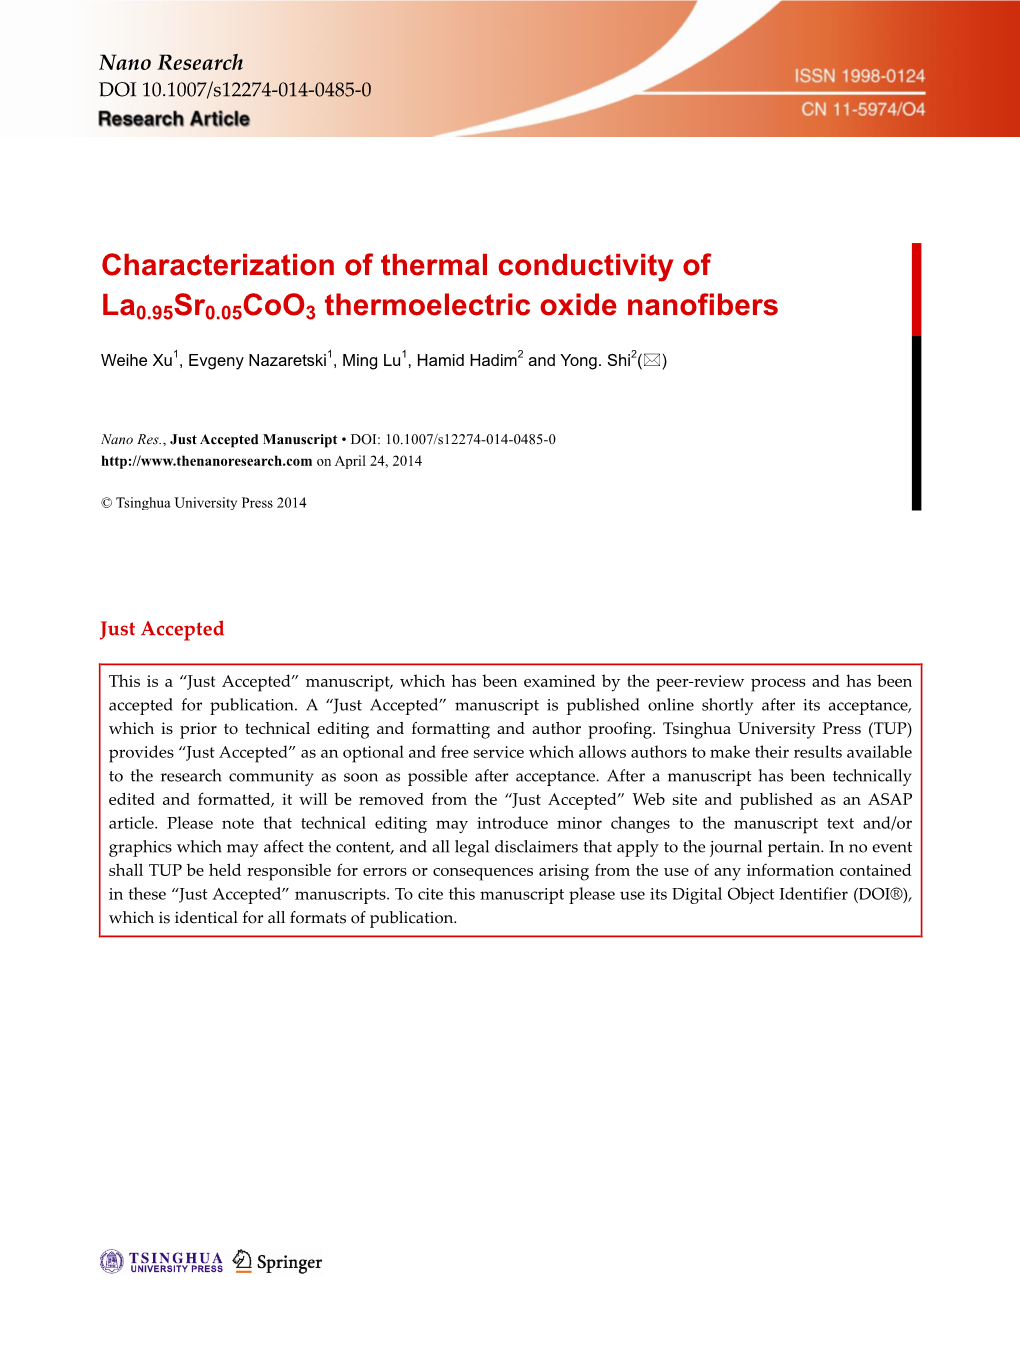 Characterization of Thermal Conductivity of La0.95Sr0.05Coo3 Thermoelectric Oxide Nanofibers